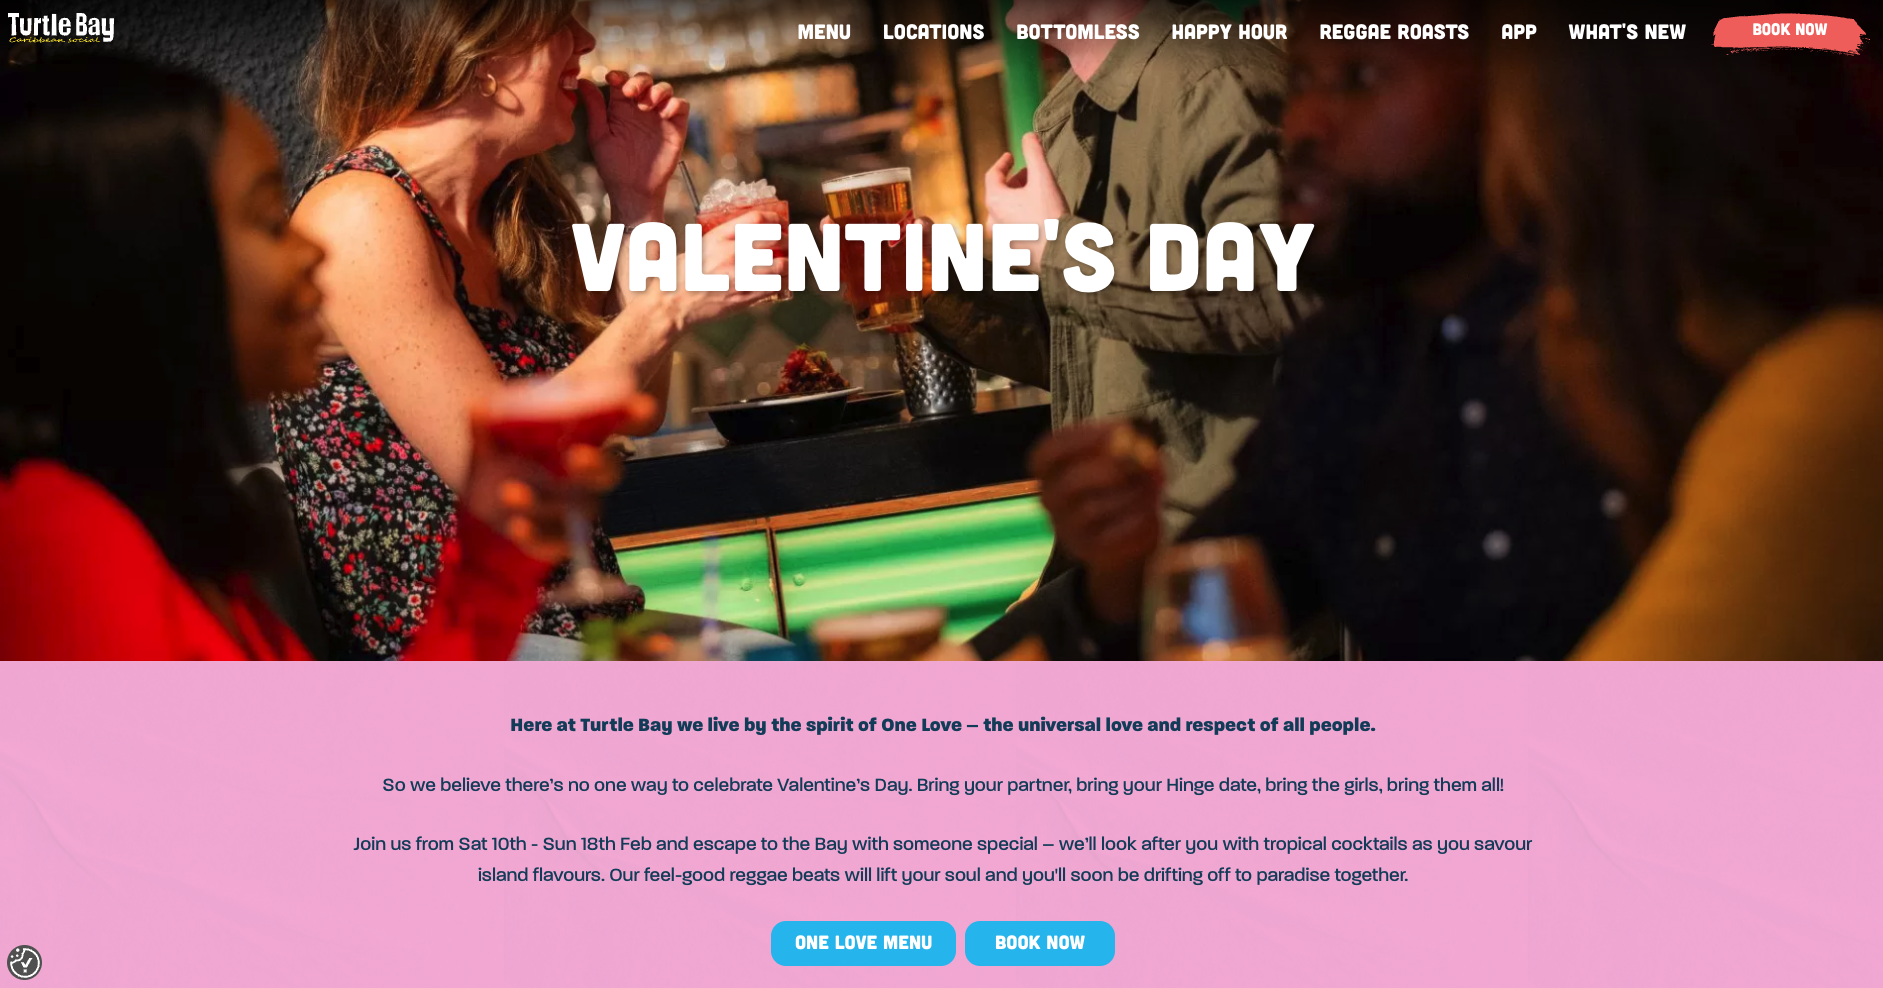 Turtle Bay promotes its Valentine's Day offering by using a landing page with open messaging. 